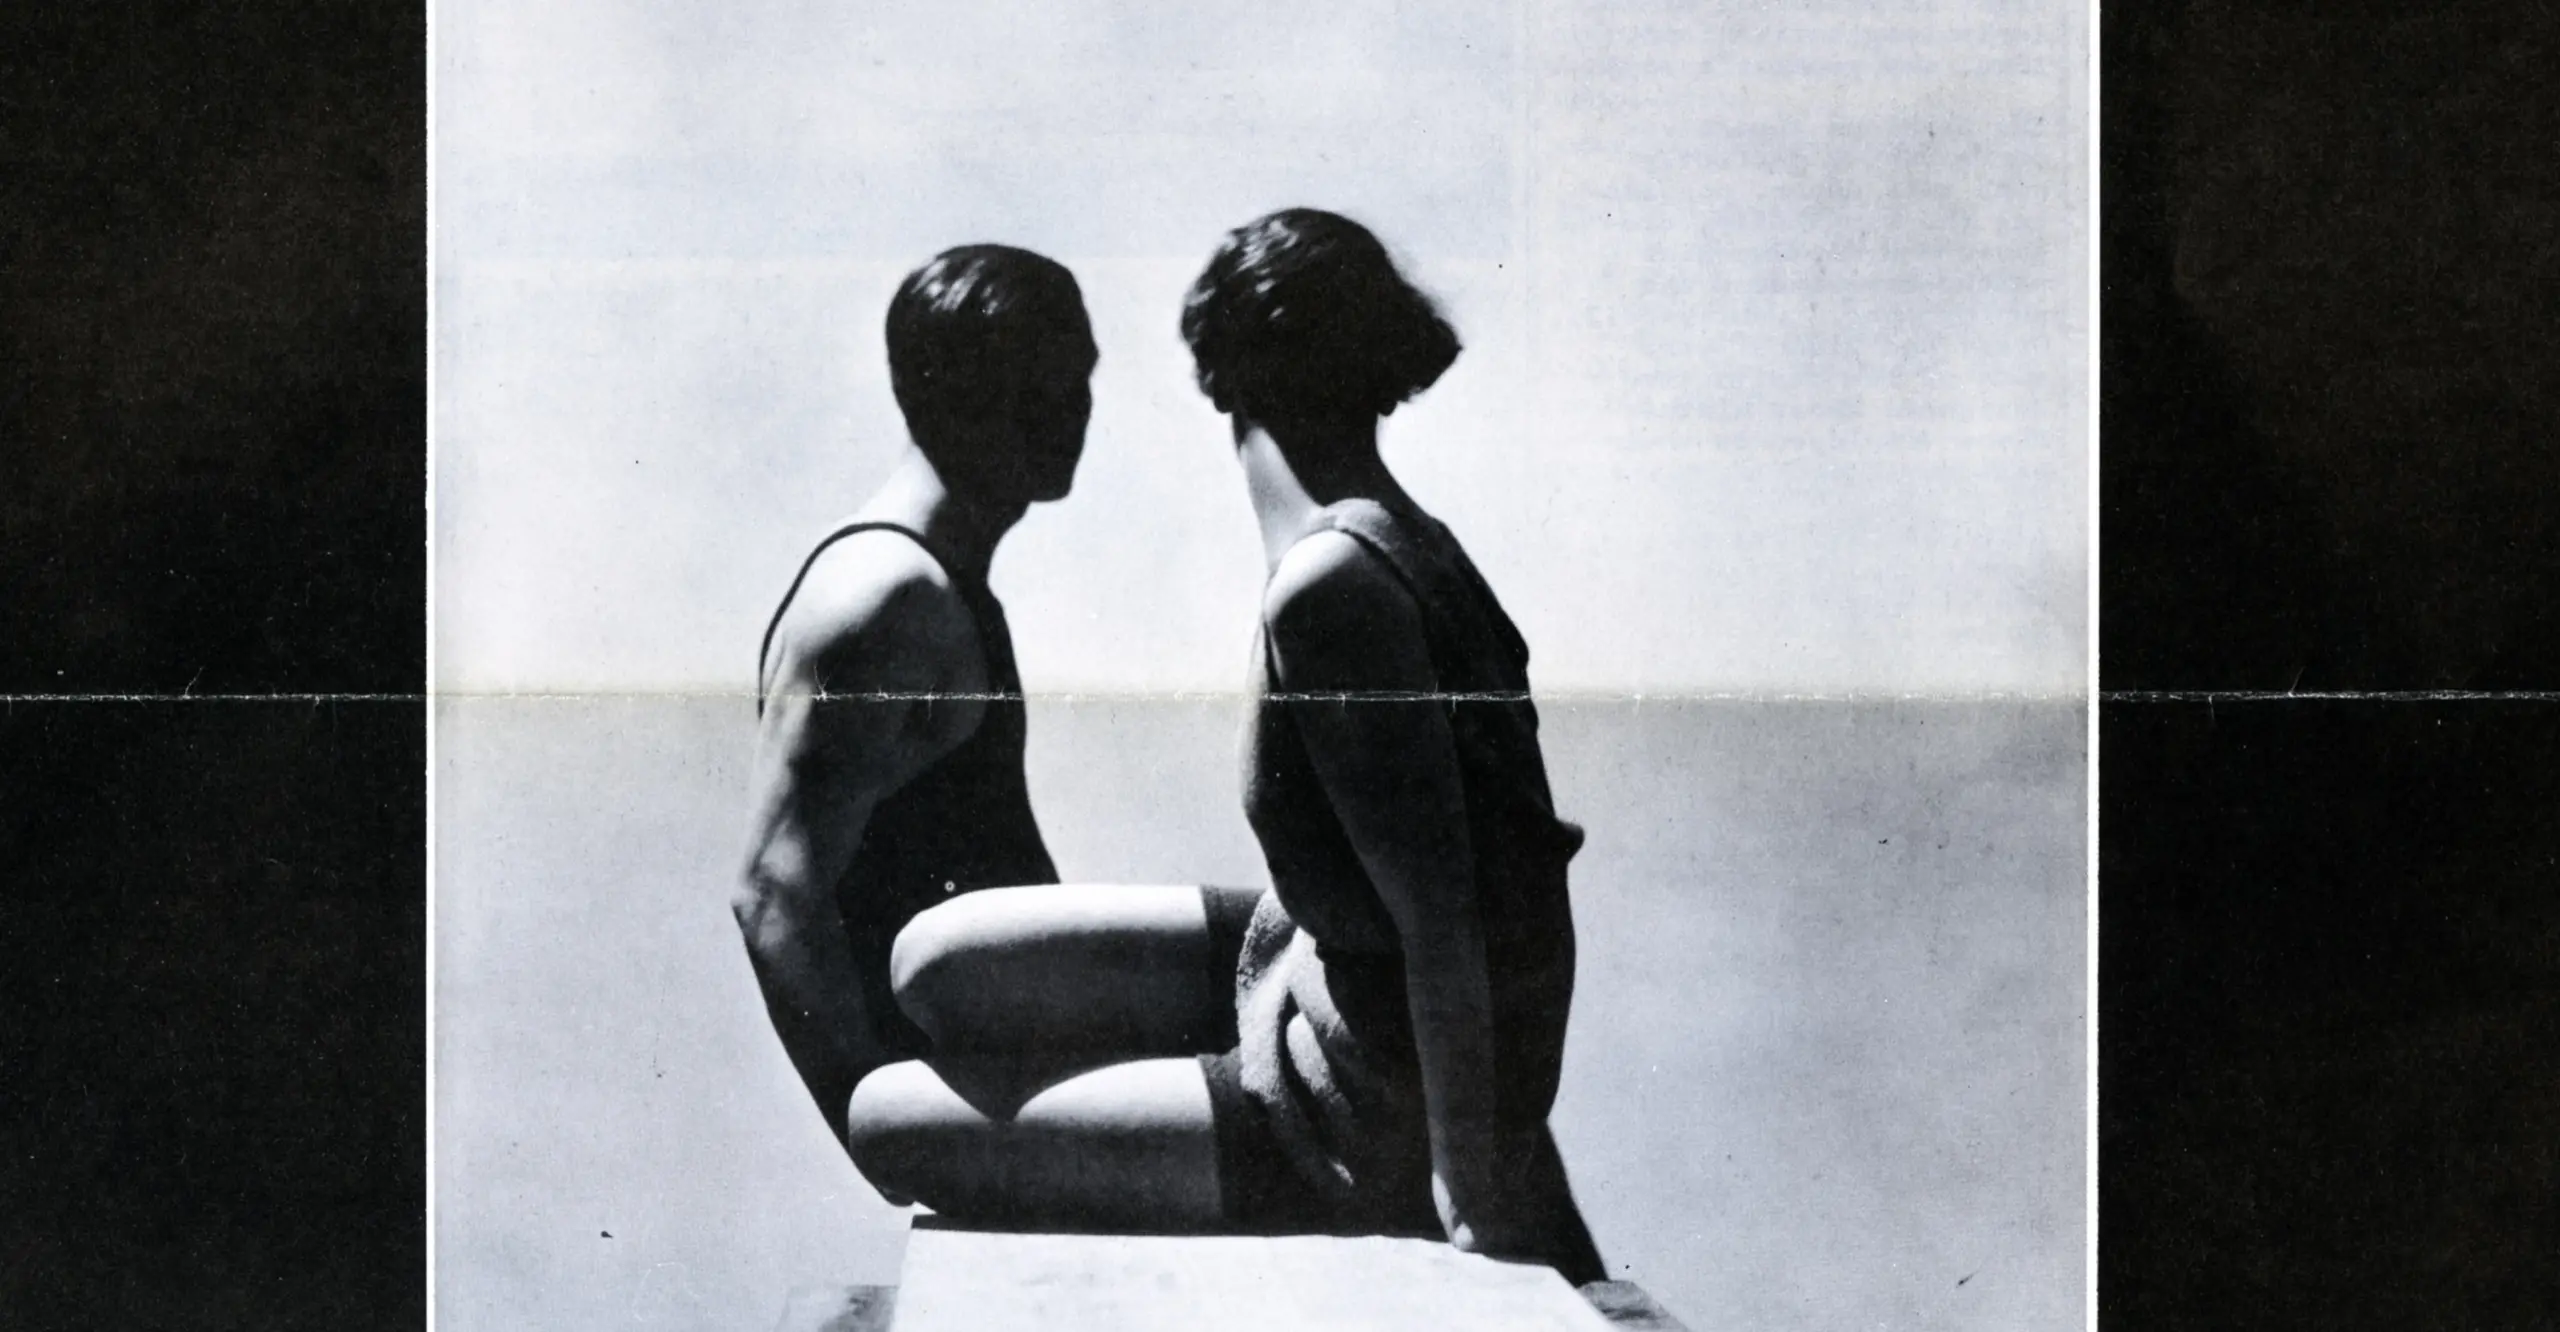 Poster courtesy The Photographers&#039; Gallery Archive, 1981. Image © George Hoyningen-Huene